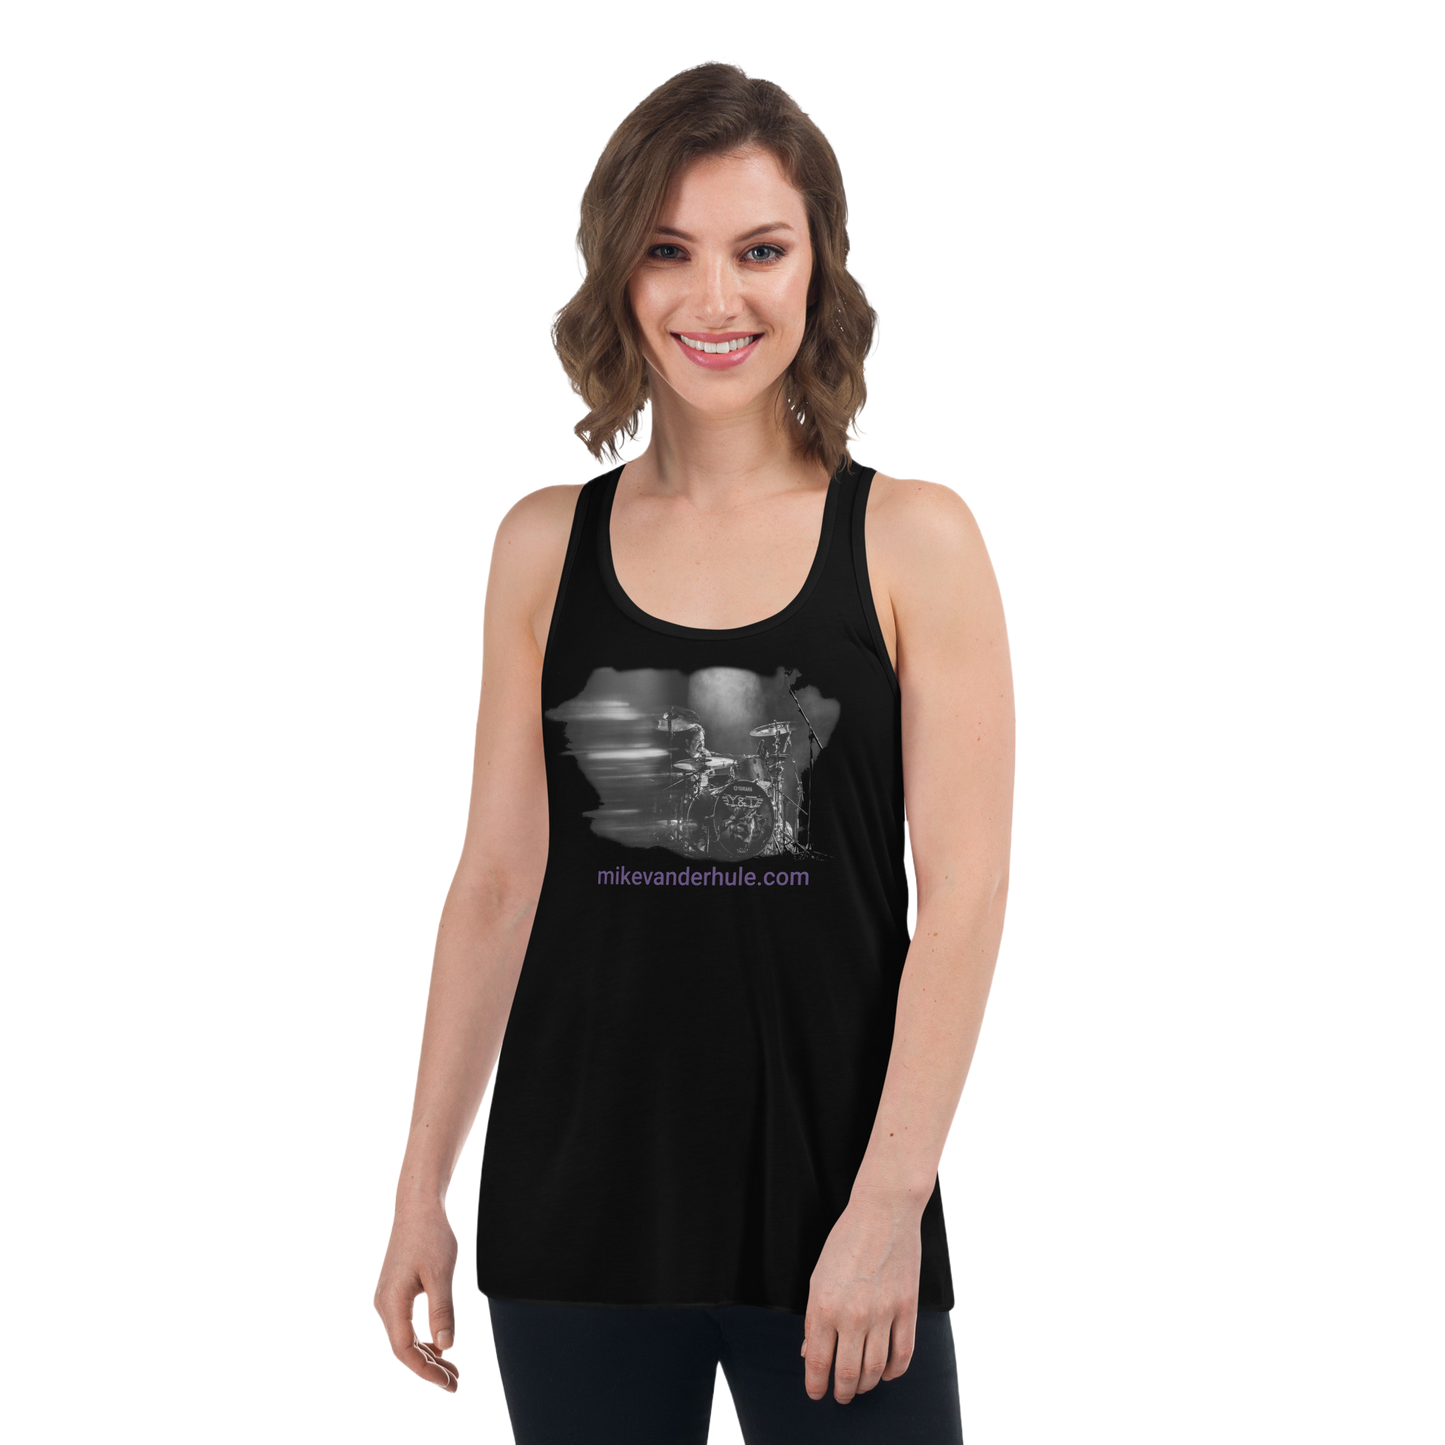 Mike "In the Moment" Women's Racerback Tank